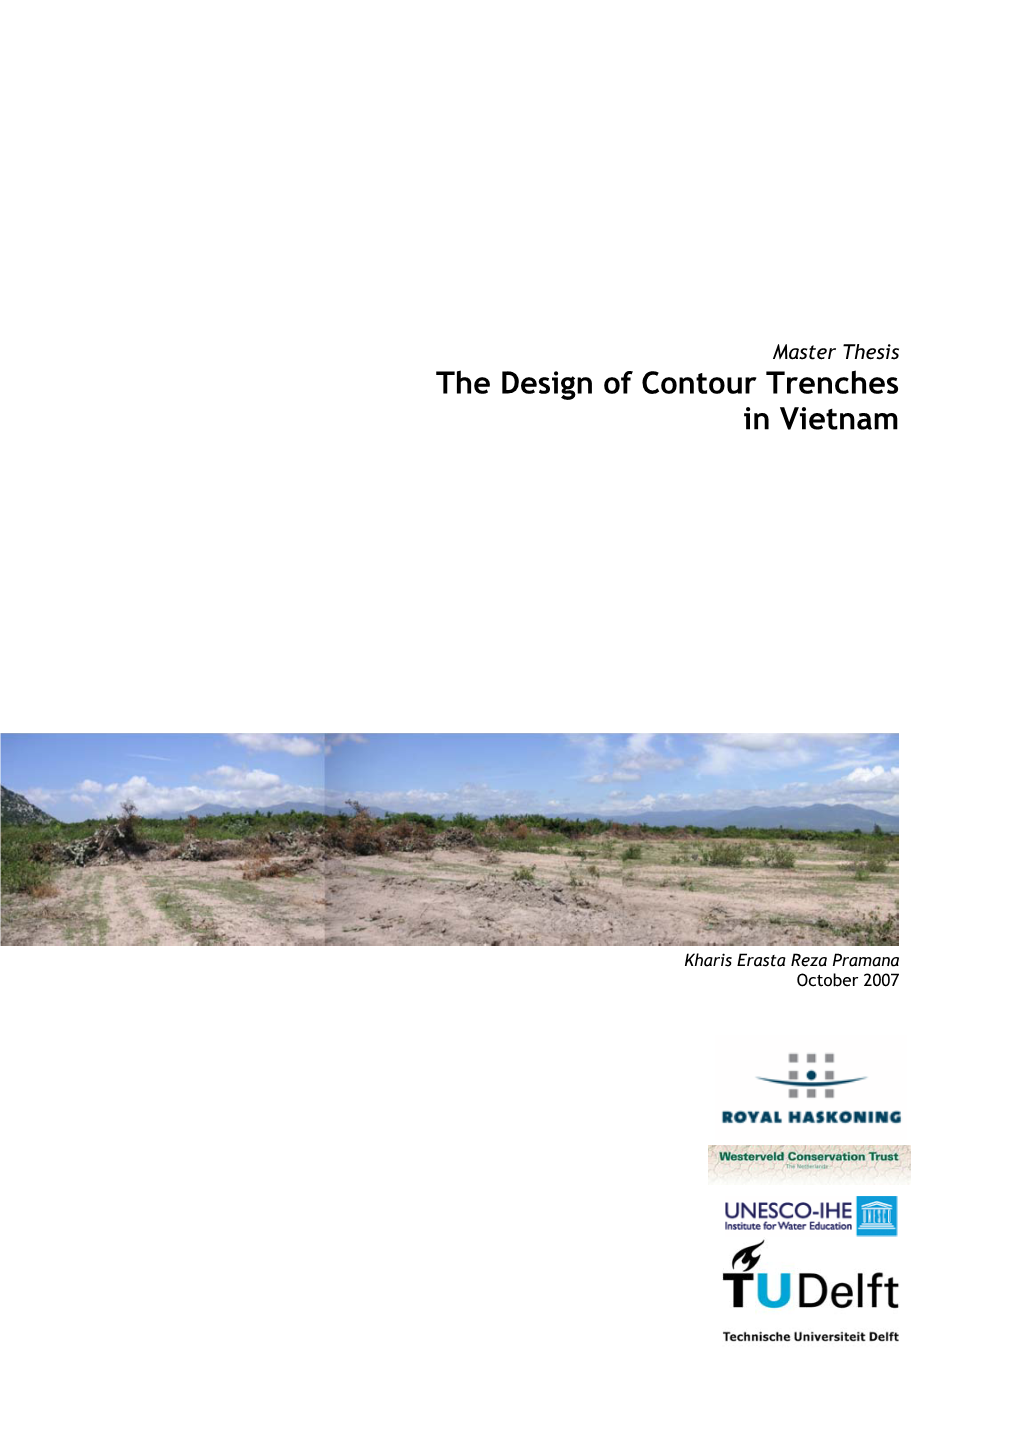 The Design of Contour Trenches in Vietnam